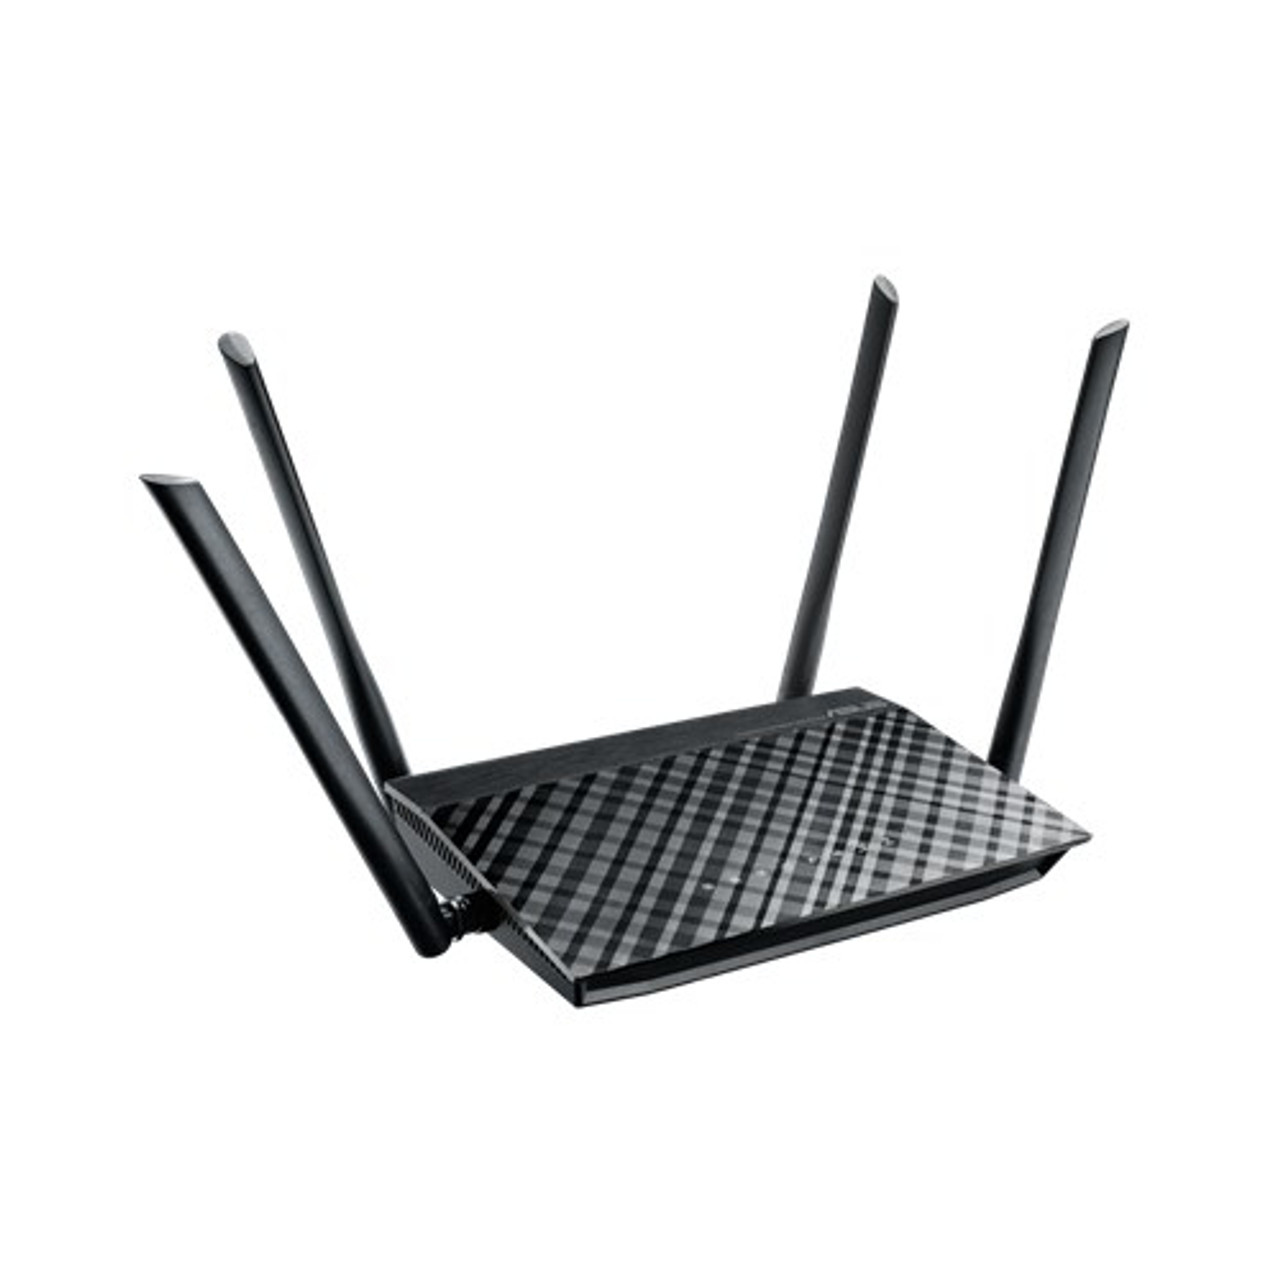 ASUS RT-AC1200 Dual-band (2.4 GHz / 5 GHz) Fast Ethernet Black wireless router